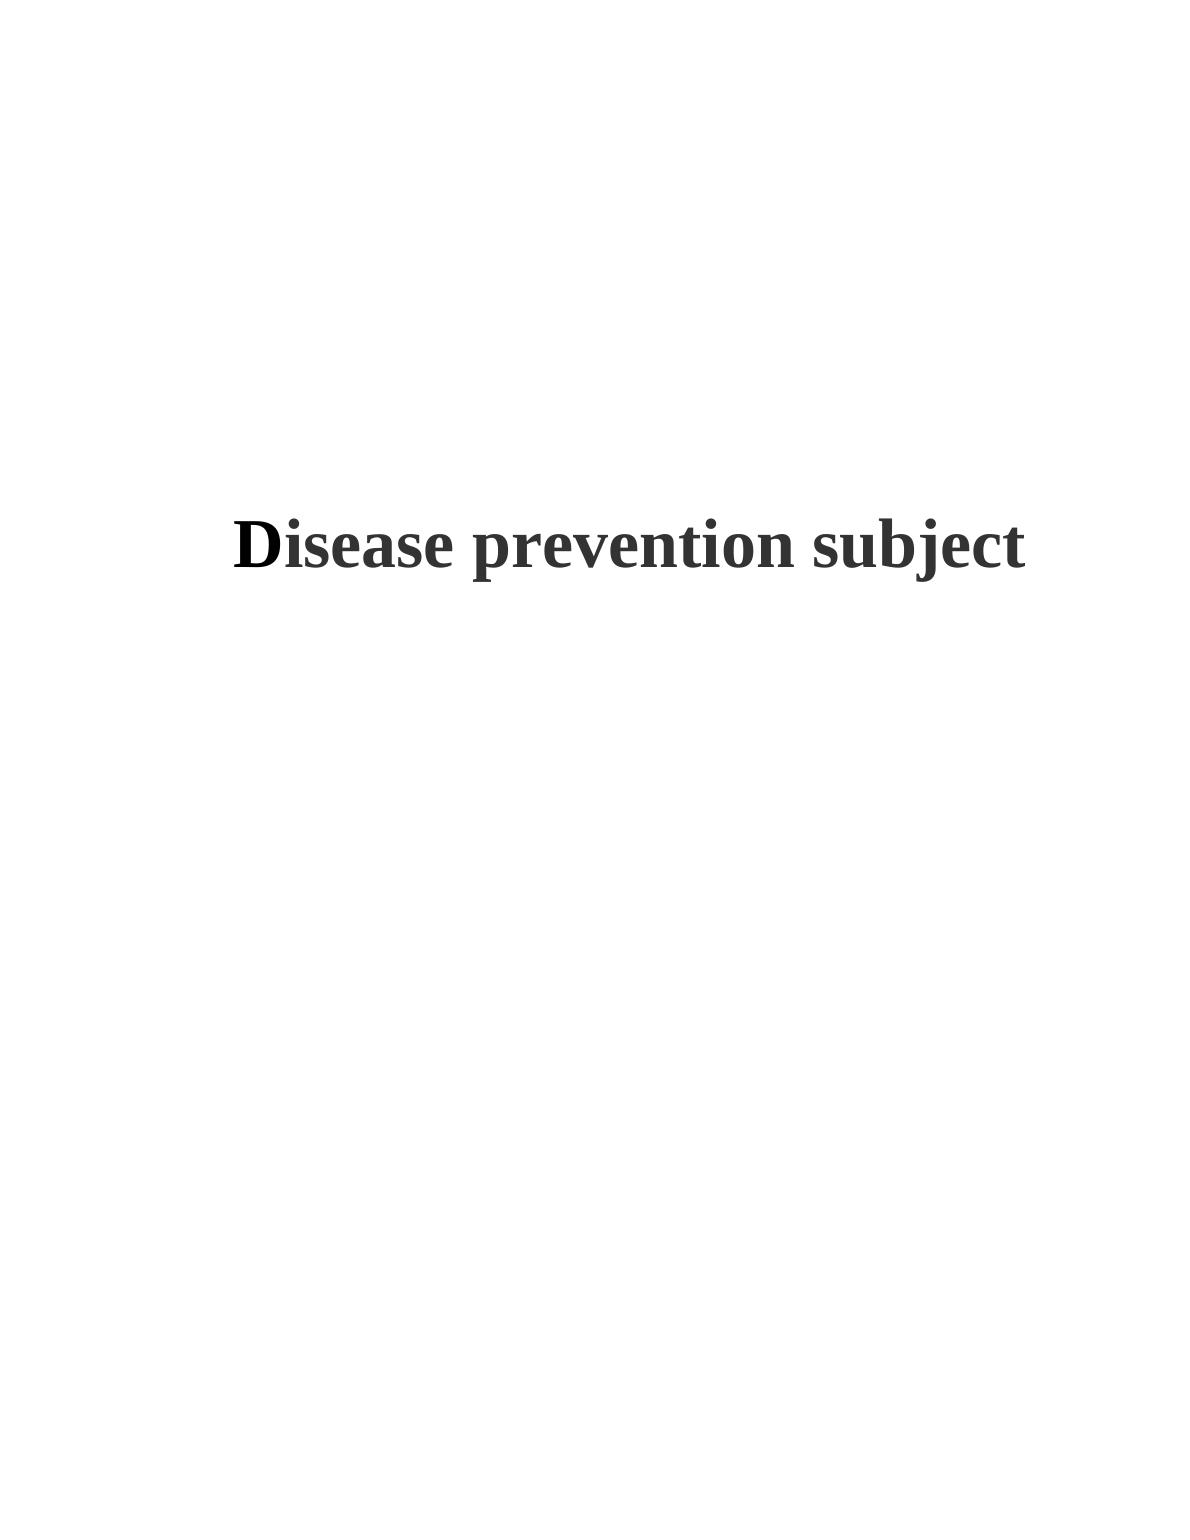 Disease Prevention Subject Assignment Sample_1